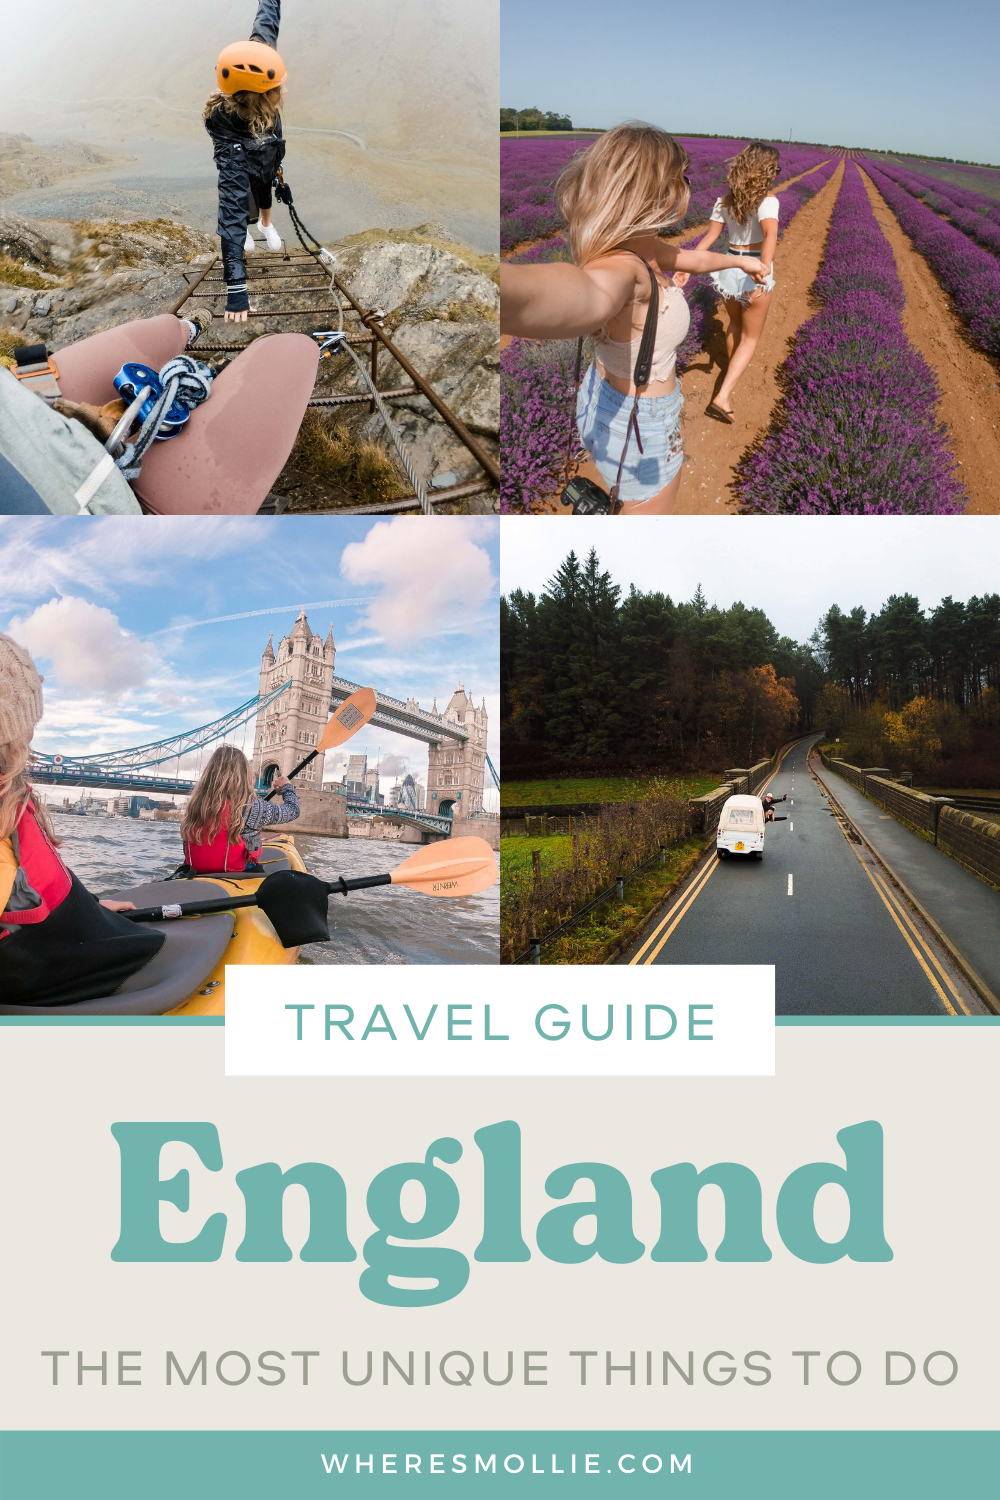 18 unique things to do in England